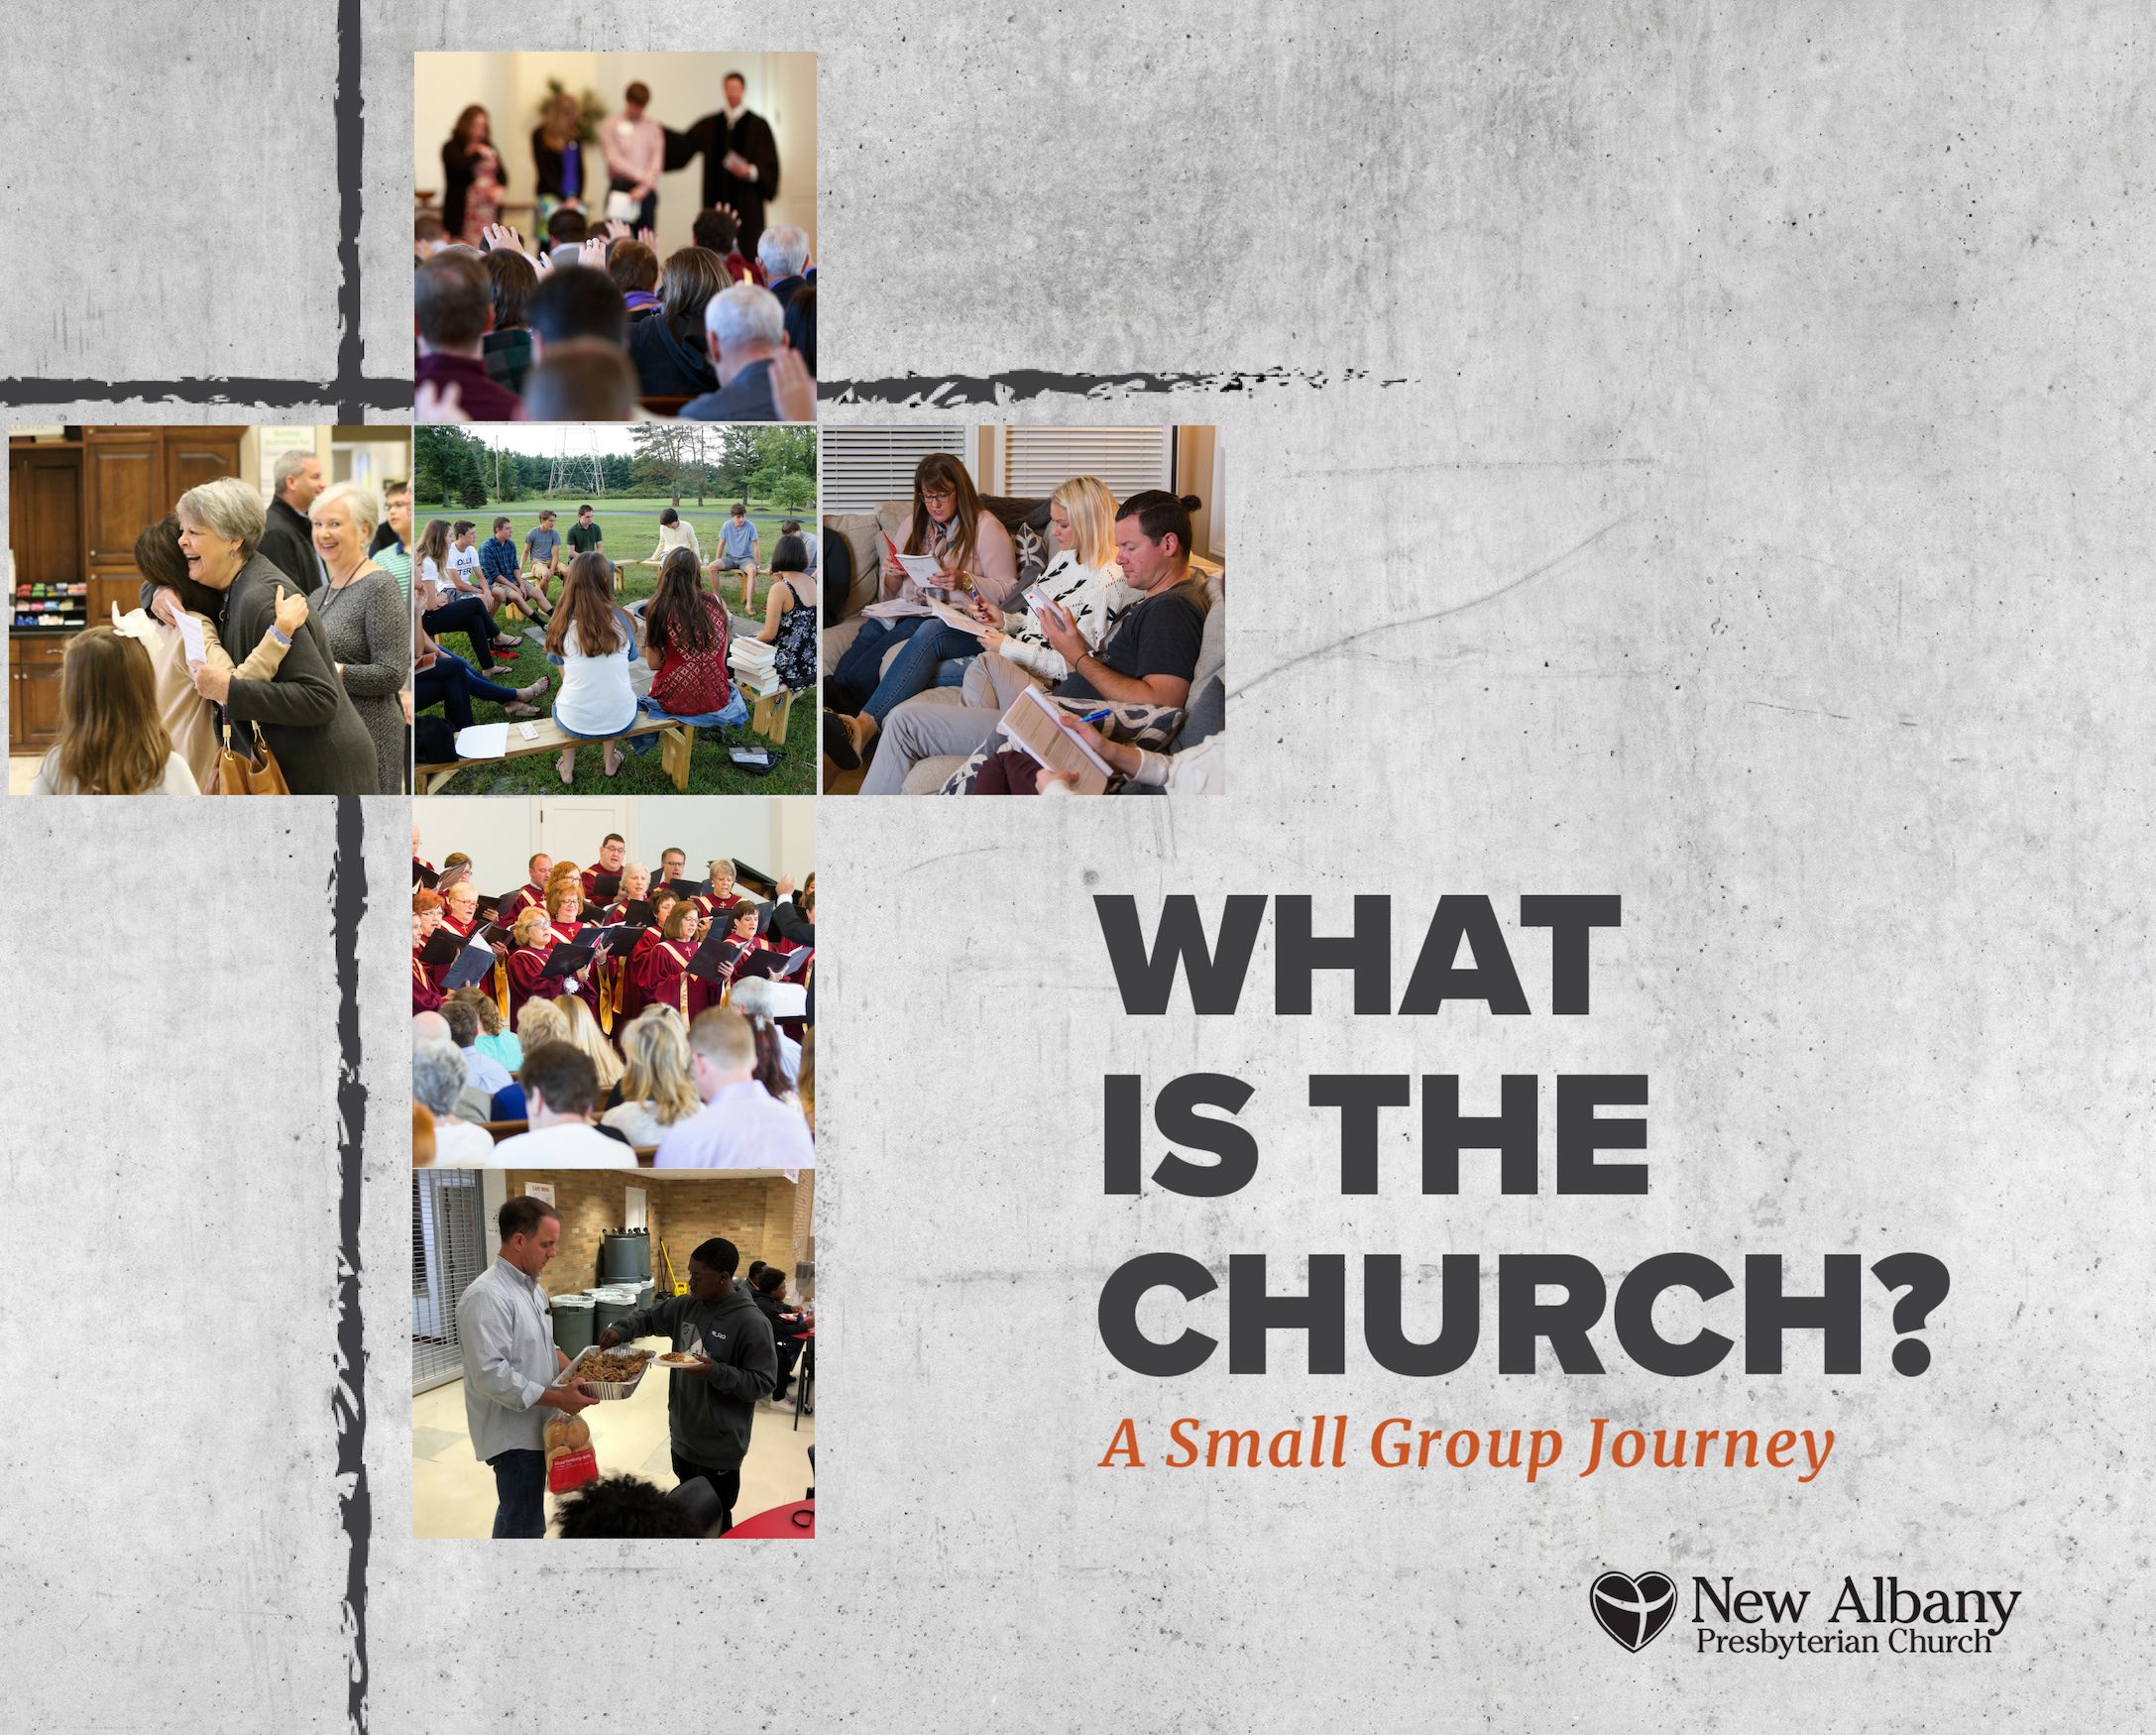 What is the Church? What if there were no Church?